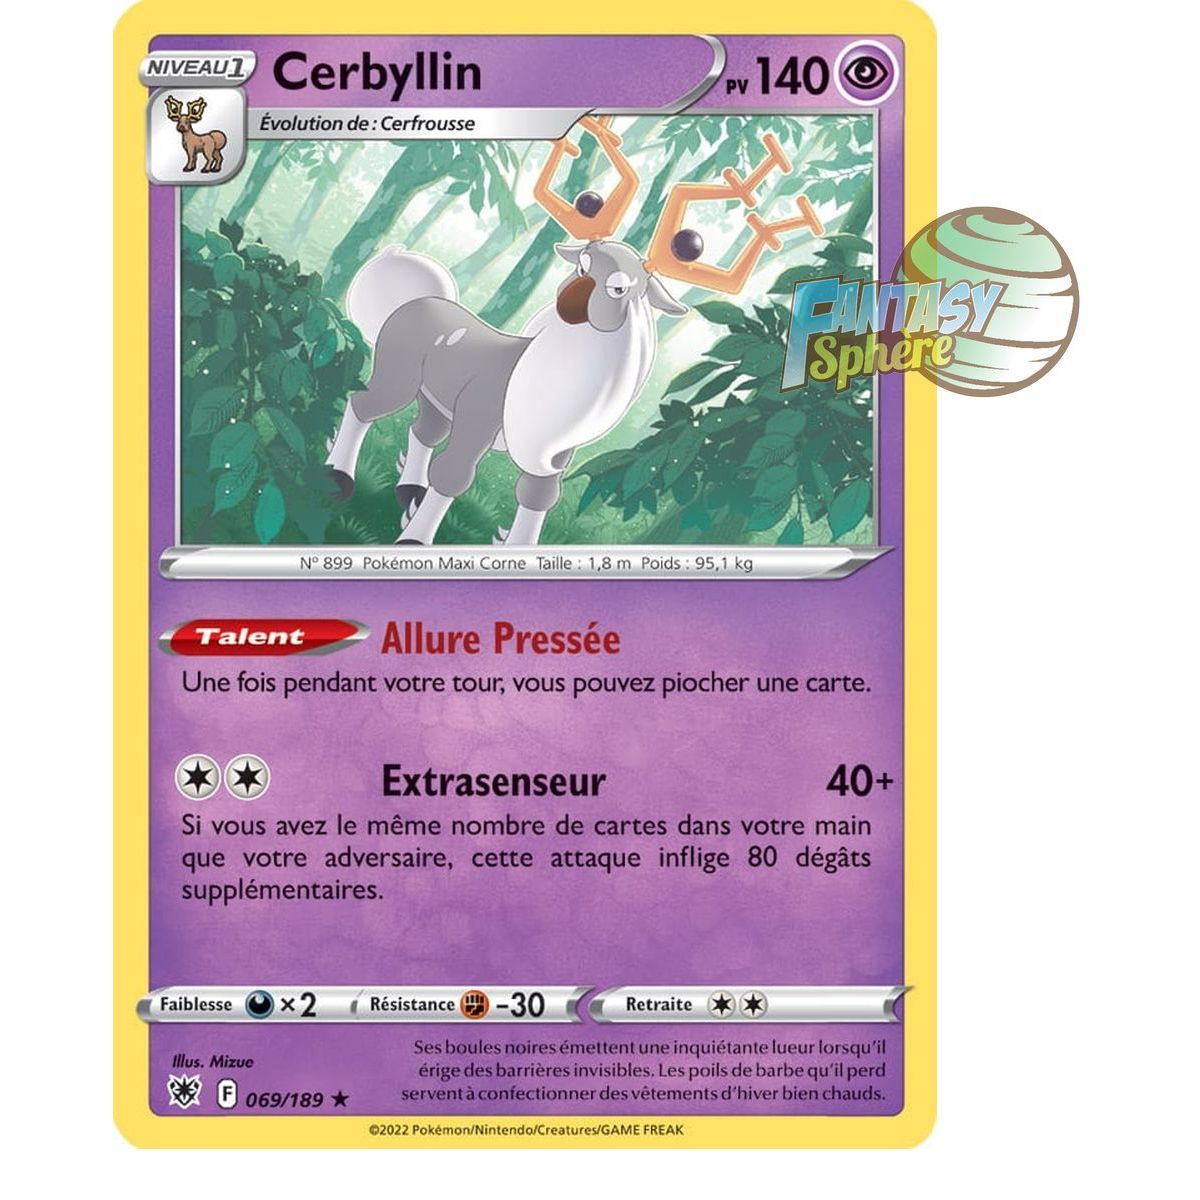 Cerbyllin - Holo Rare 69/189_H - Epee et Bouclier 10 Astres Radieux